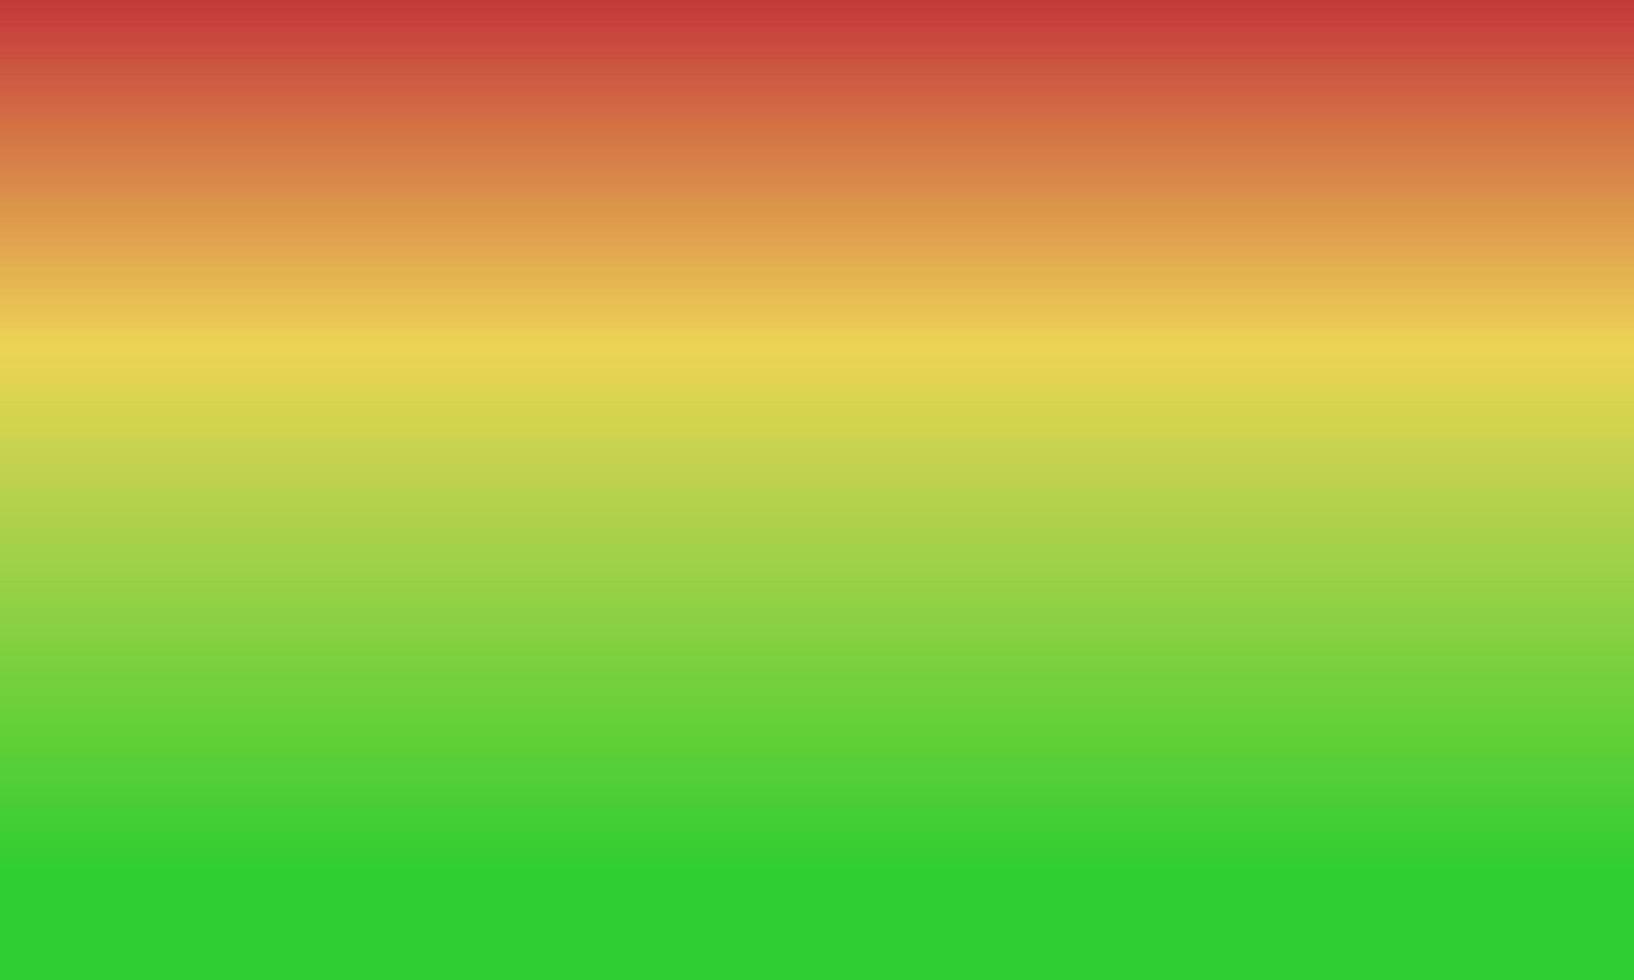 Design simple lime green,red and yellow gradient color illustration background photo